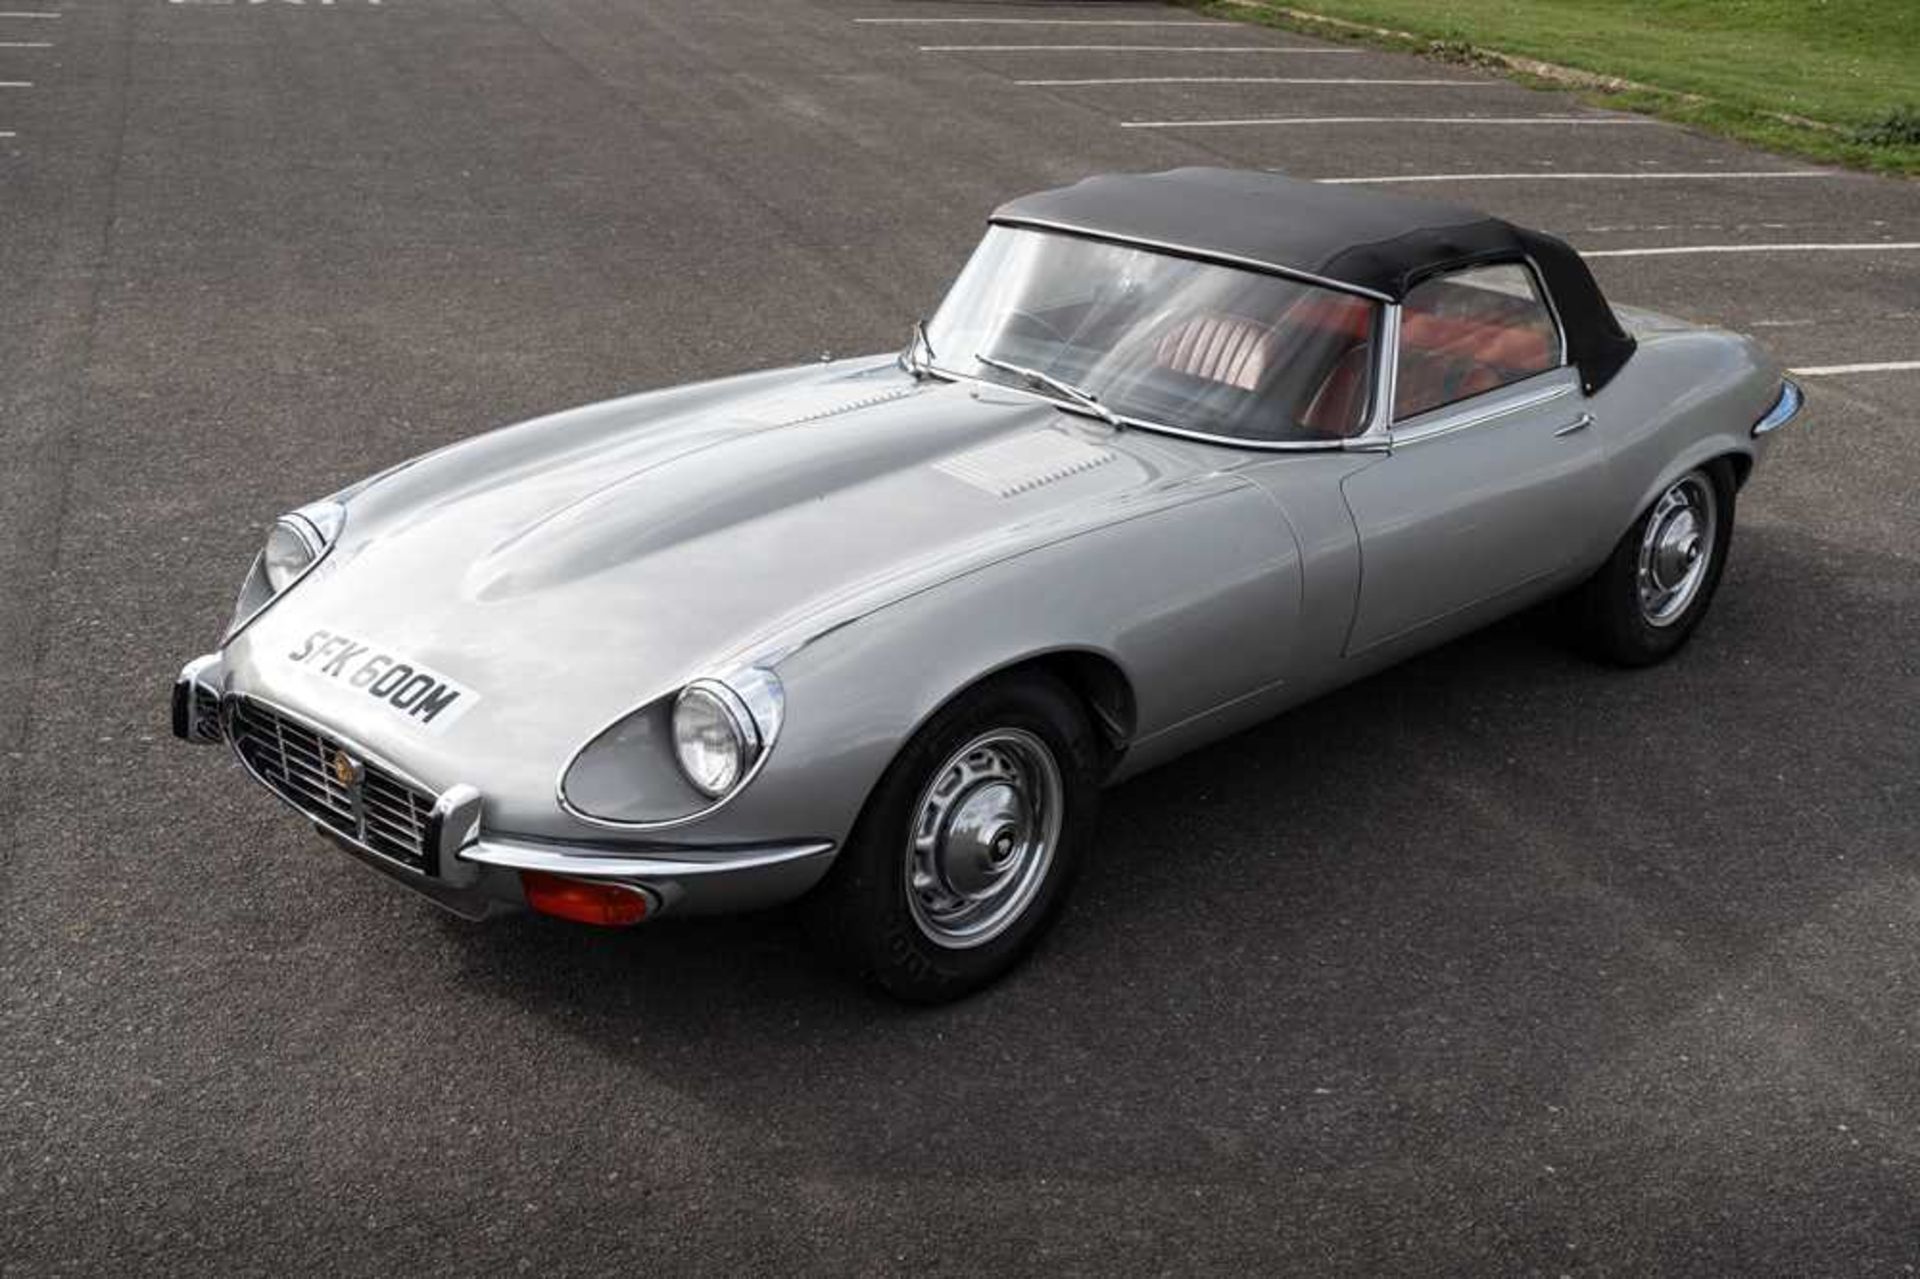 1974 Jaguar E-Type Series III V12 Roadster Only one family owner and 54,412 miles from new - Image 8 of 89